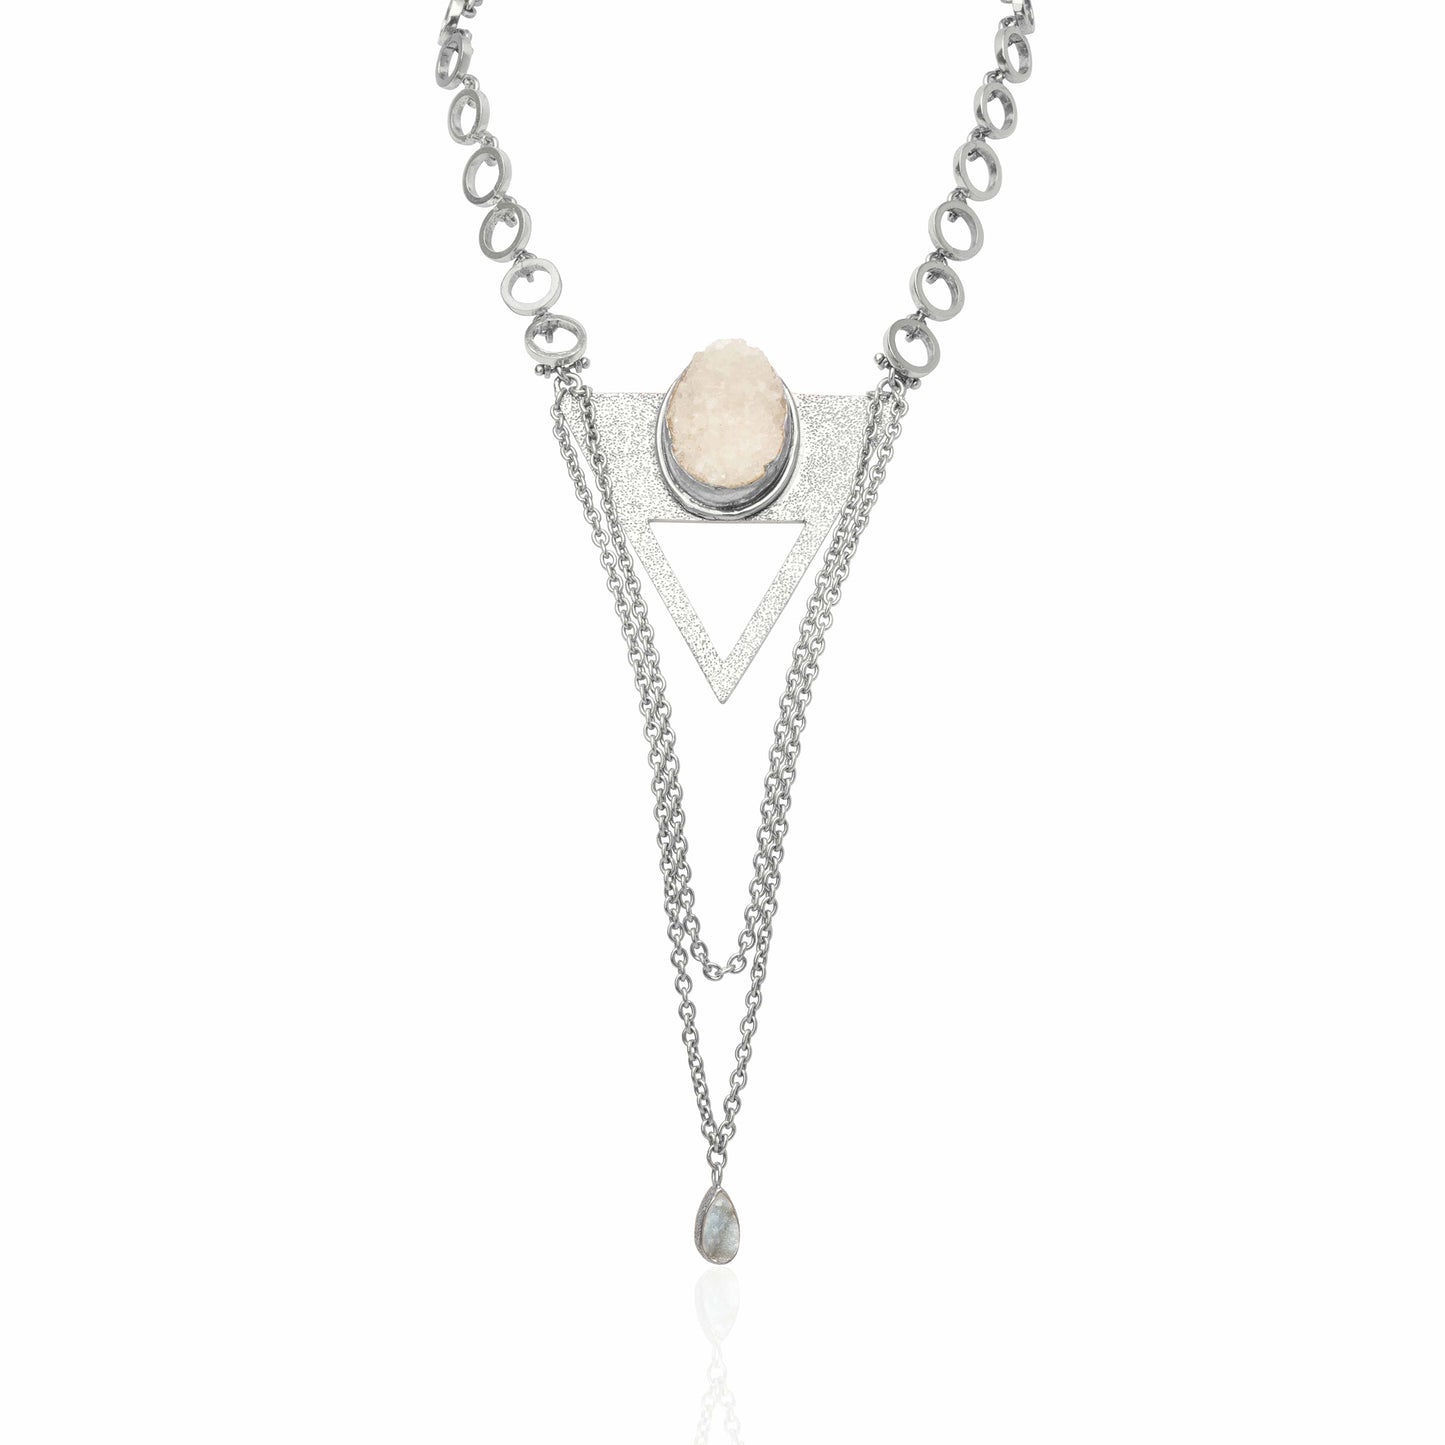 The ARIA Necklace